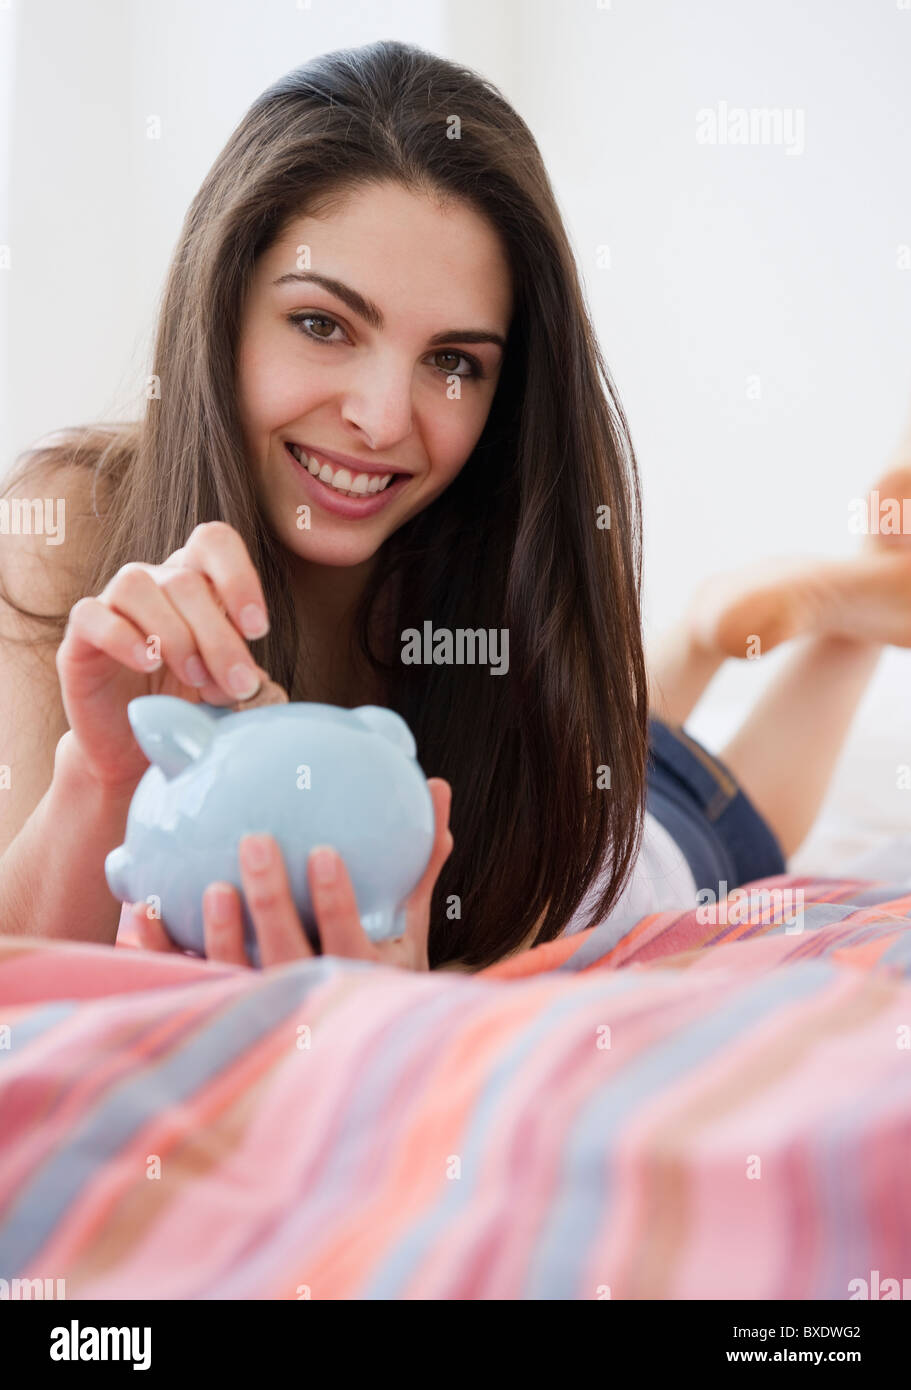 Woman putting coins in piggy bank Banque D'Images